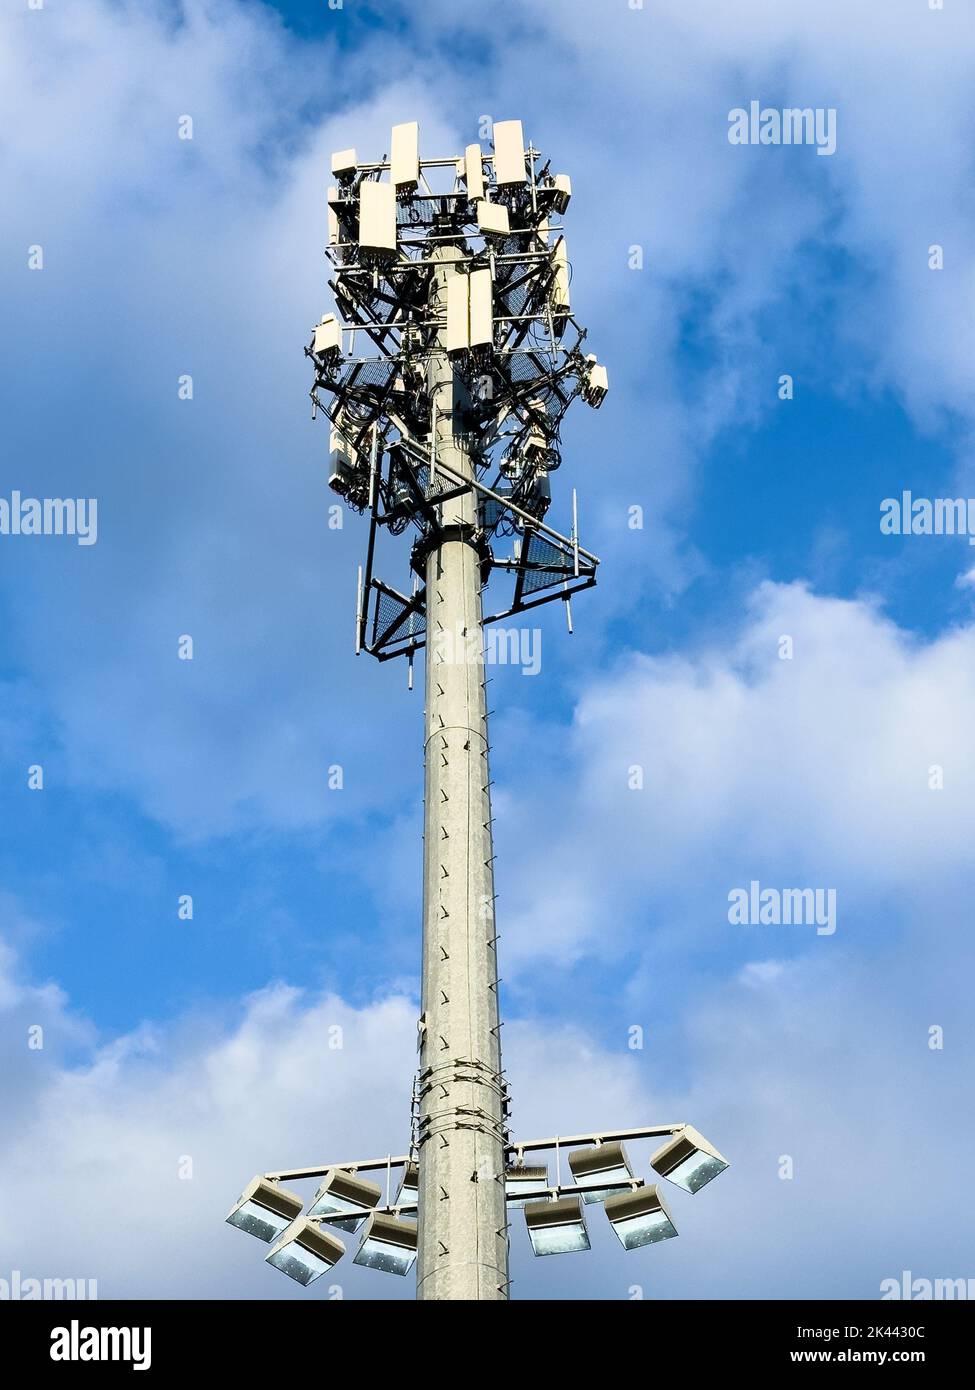 Telecommunication tower with antennas against the blue cloudy sky in vertical position Stock Photo